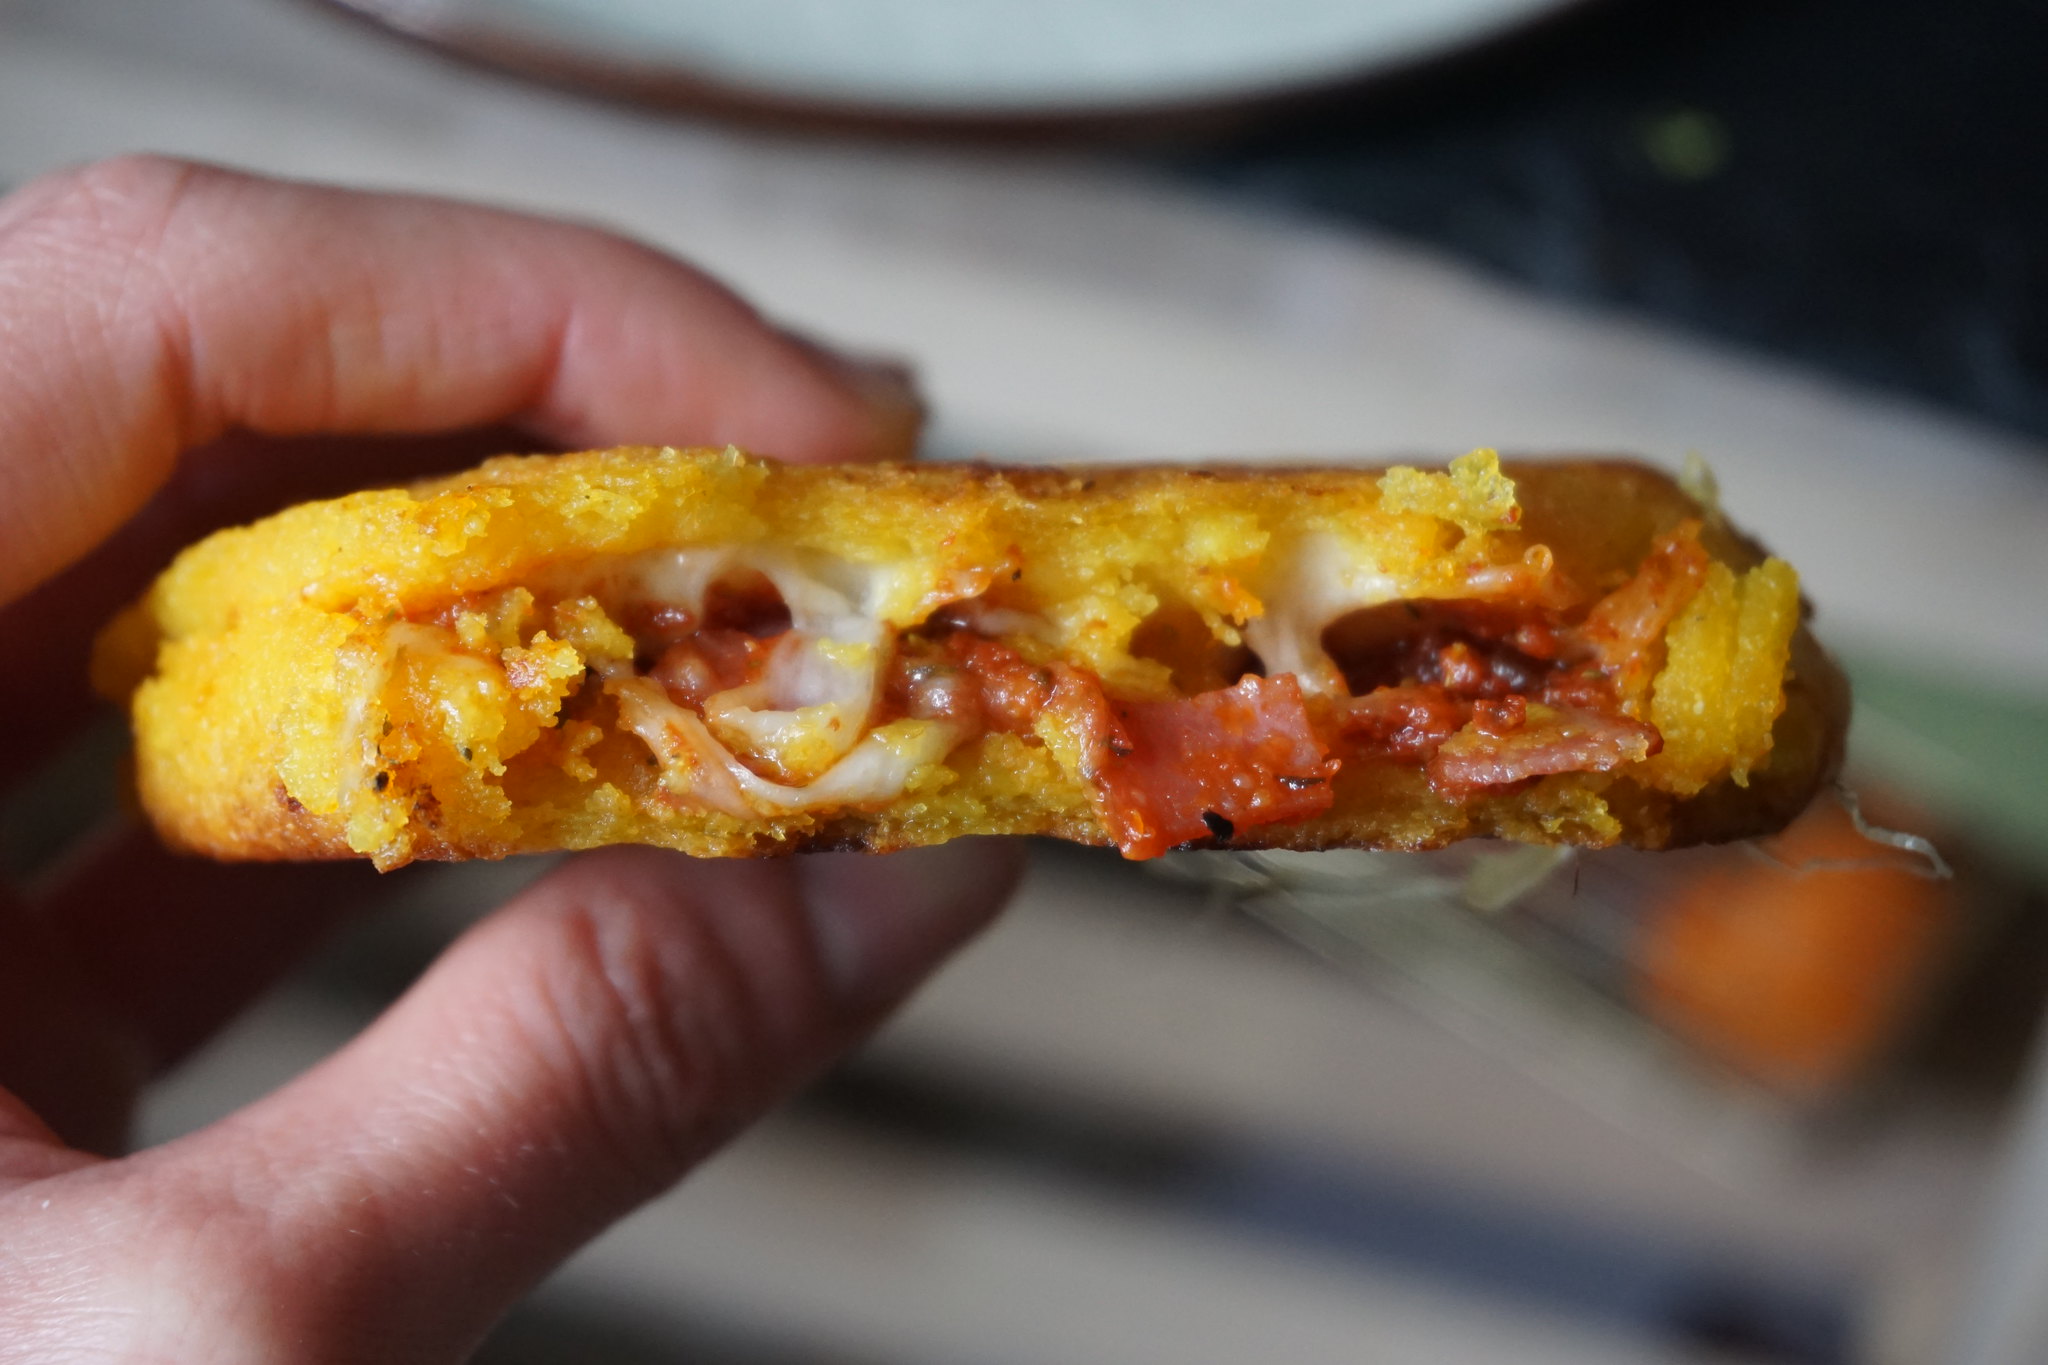 Easy, no bake, gluten free hot pocket arepas with pizza style filling (pepperoni, mozzarella and pizza sauce)